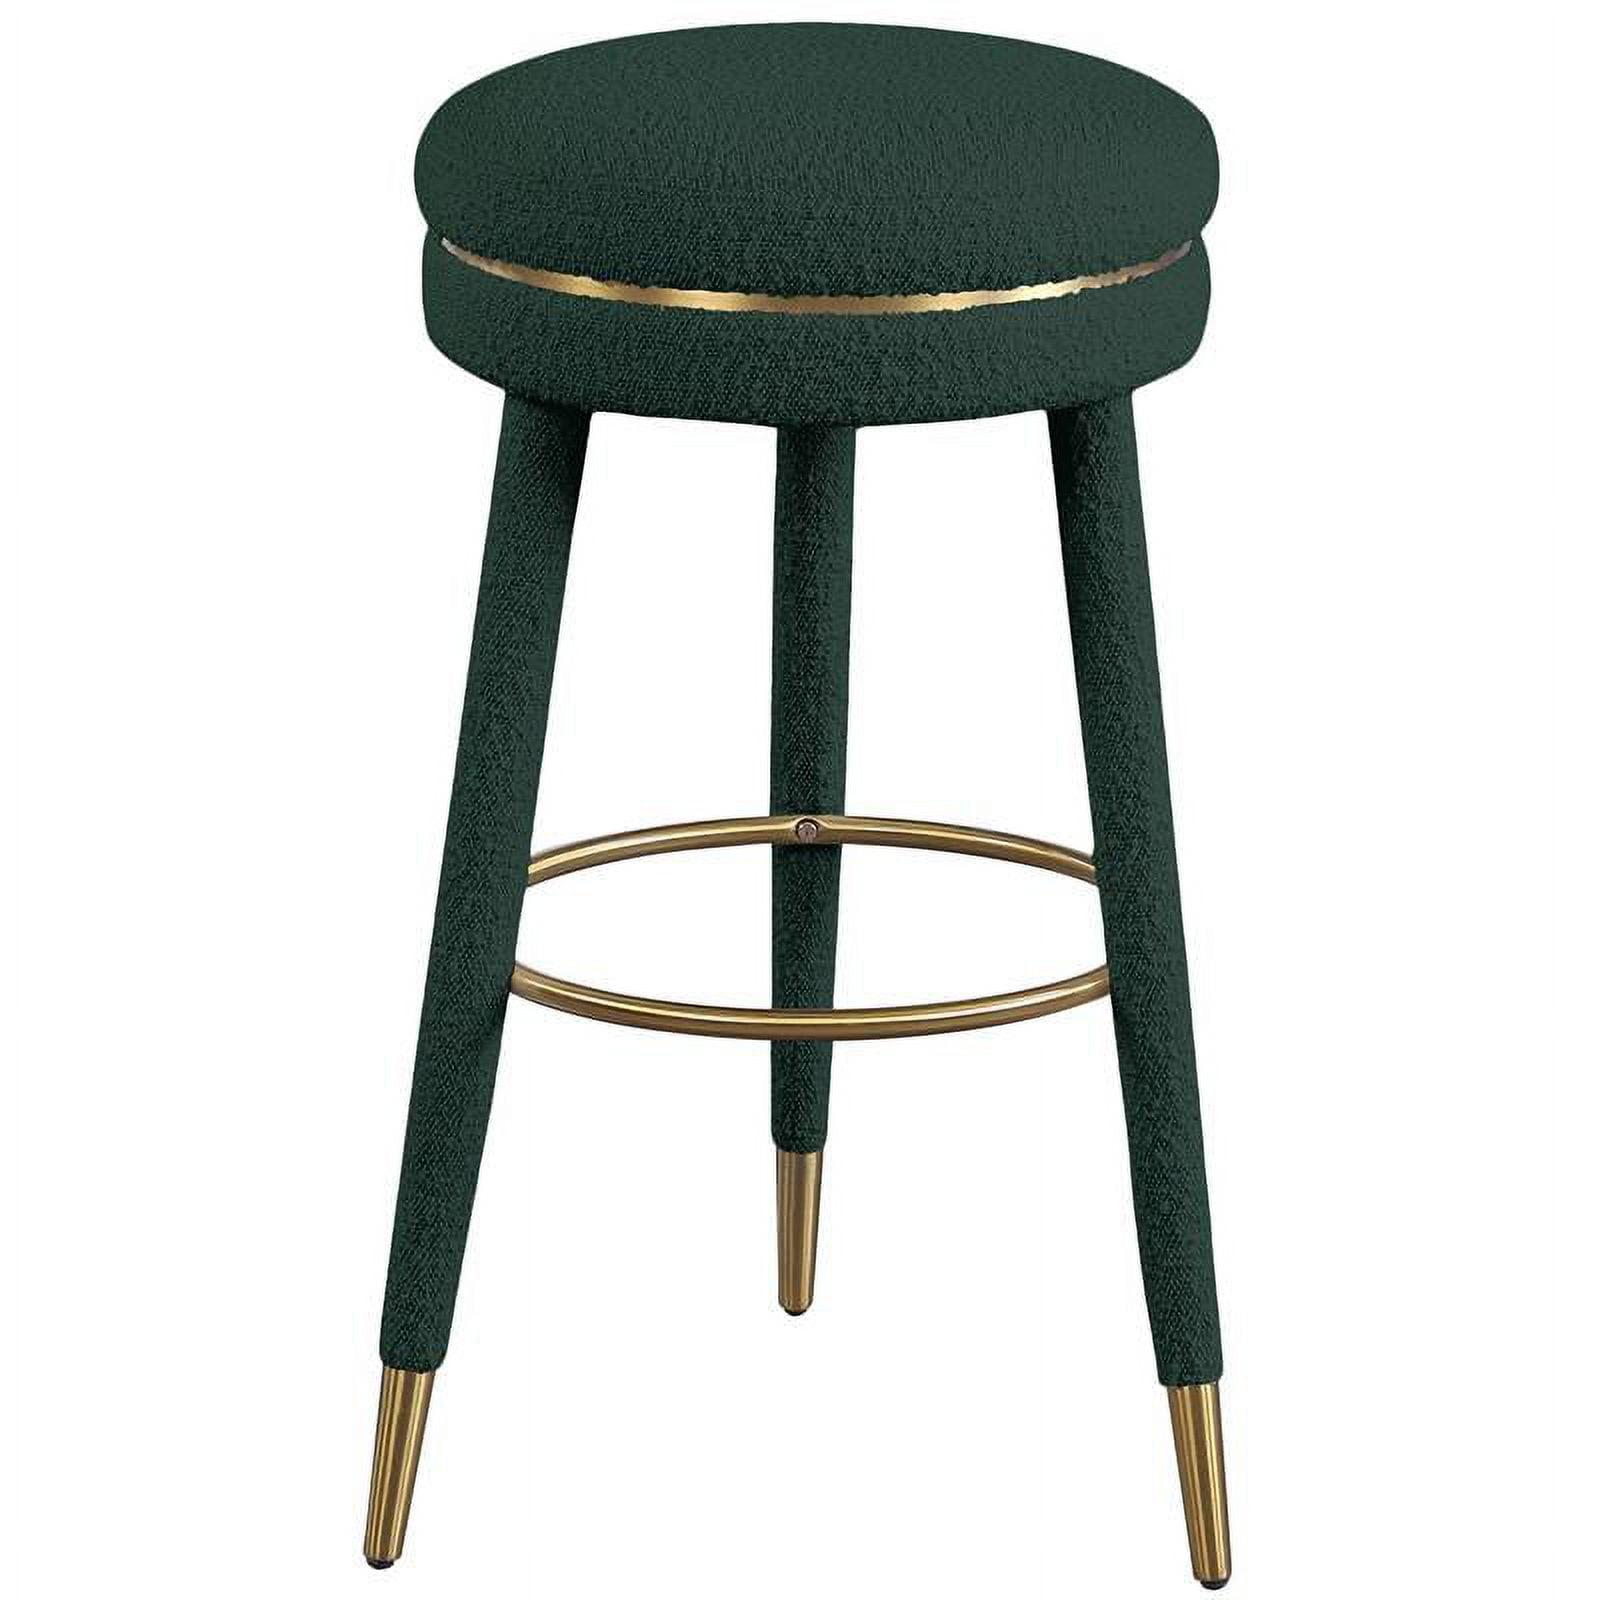 Contemporary Gold and Green Swivel Bar Stool with Wood Accents